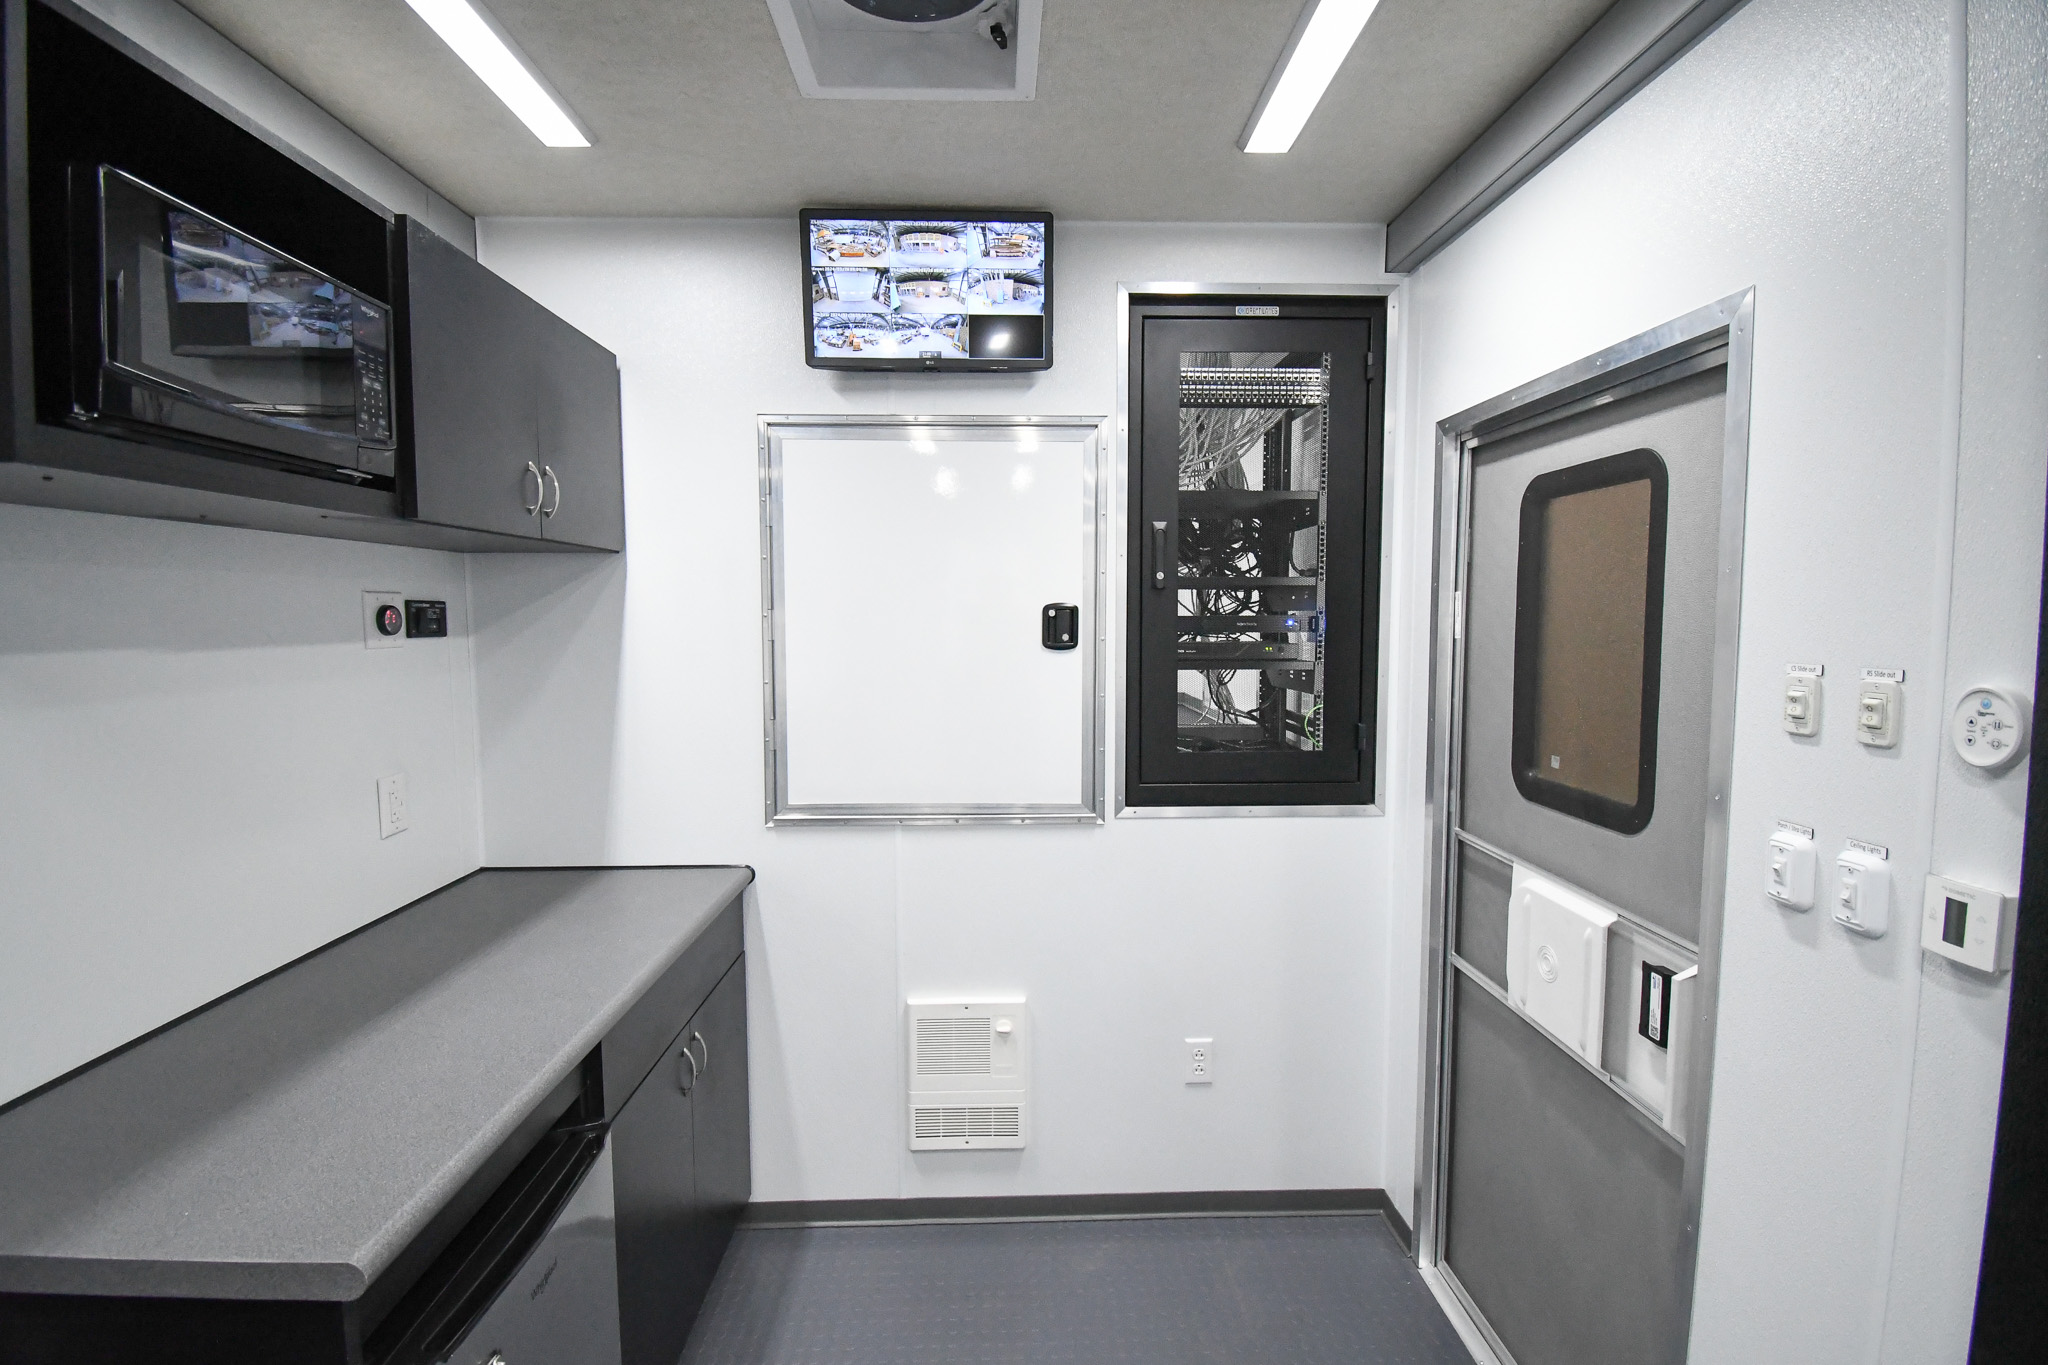 A view showing an exit, galley, electronics rack, overhead monitor, and doorway to the 5th wheel storage inside the unit for Hillsborough, NC.